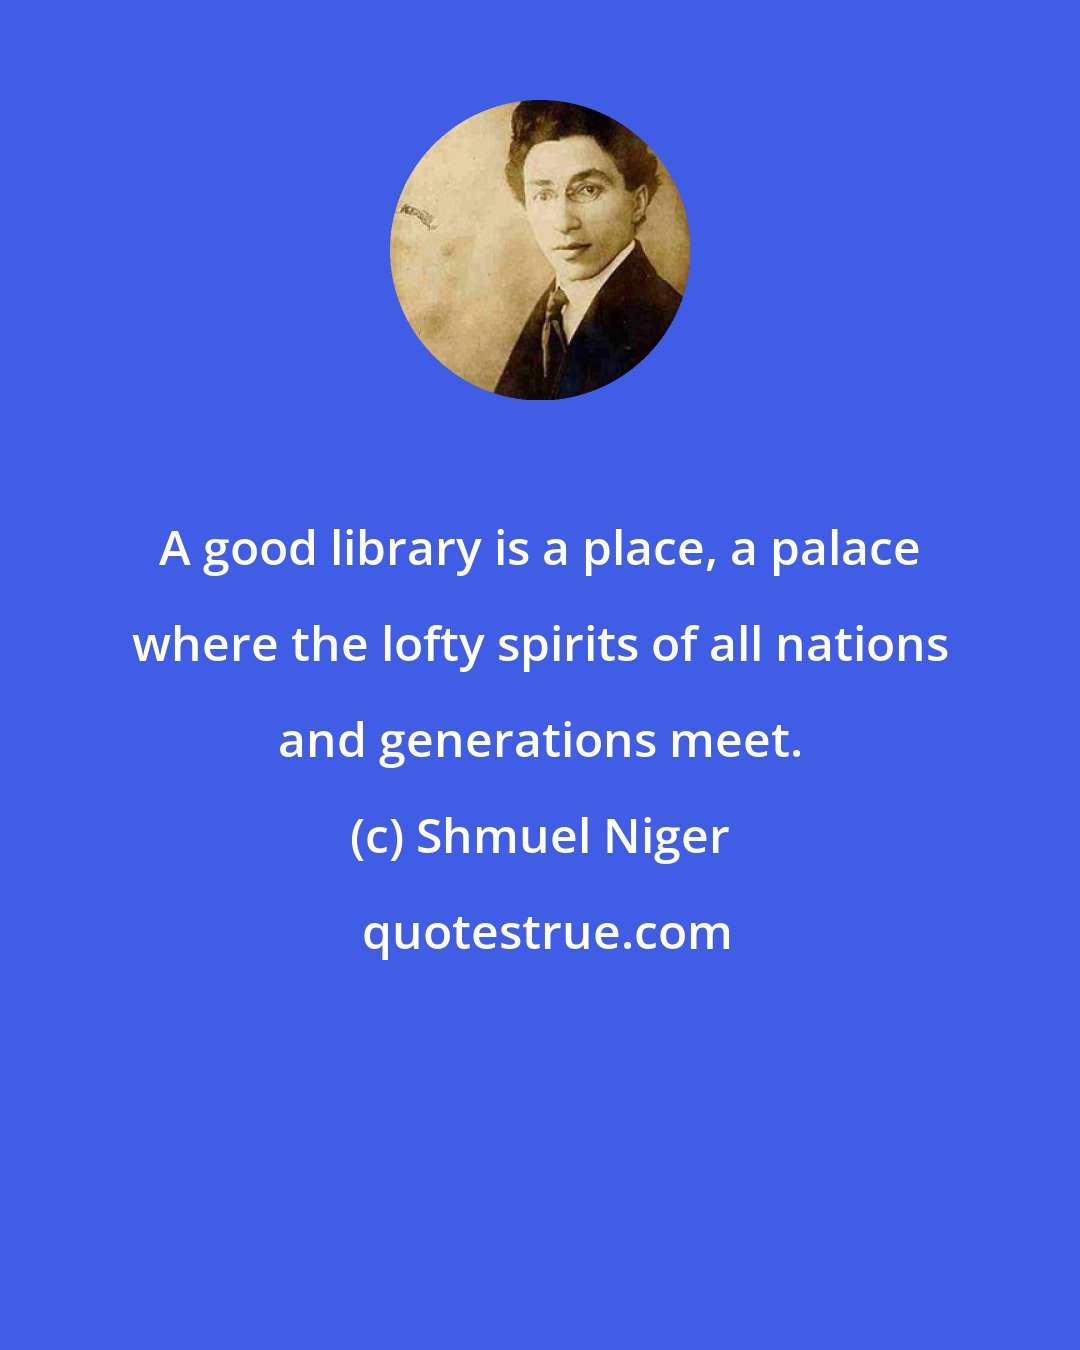 Shmuel Niger: A good library is a place, a palace where the lofty spirits of all nations and generations meet.